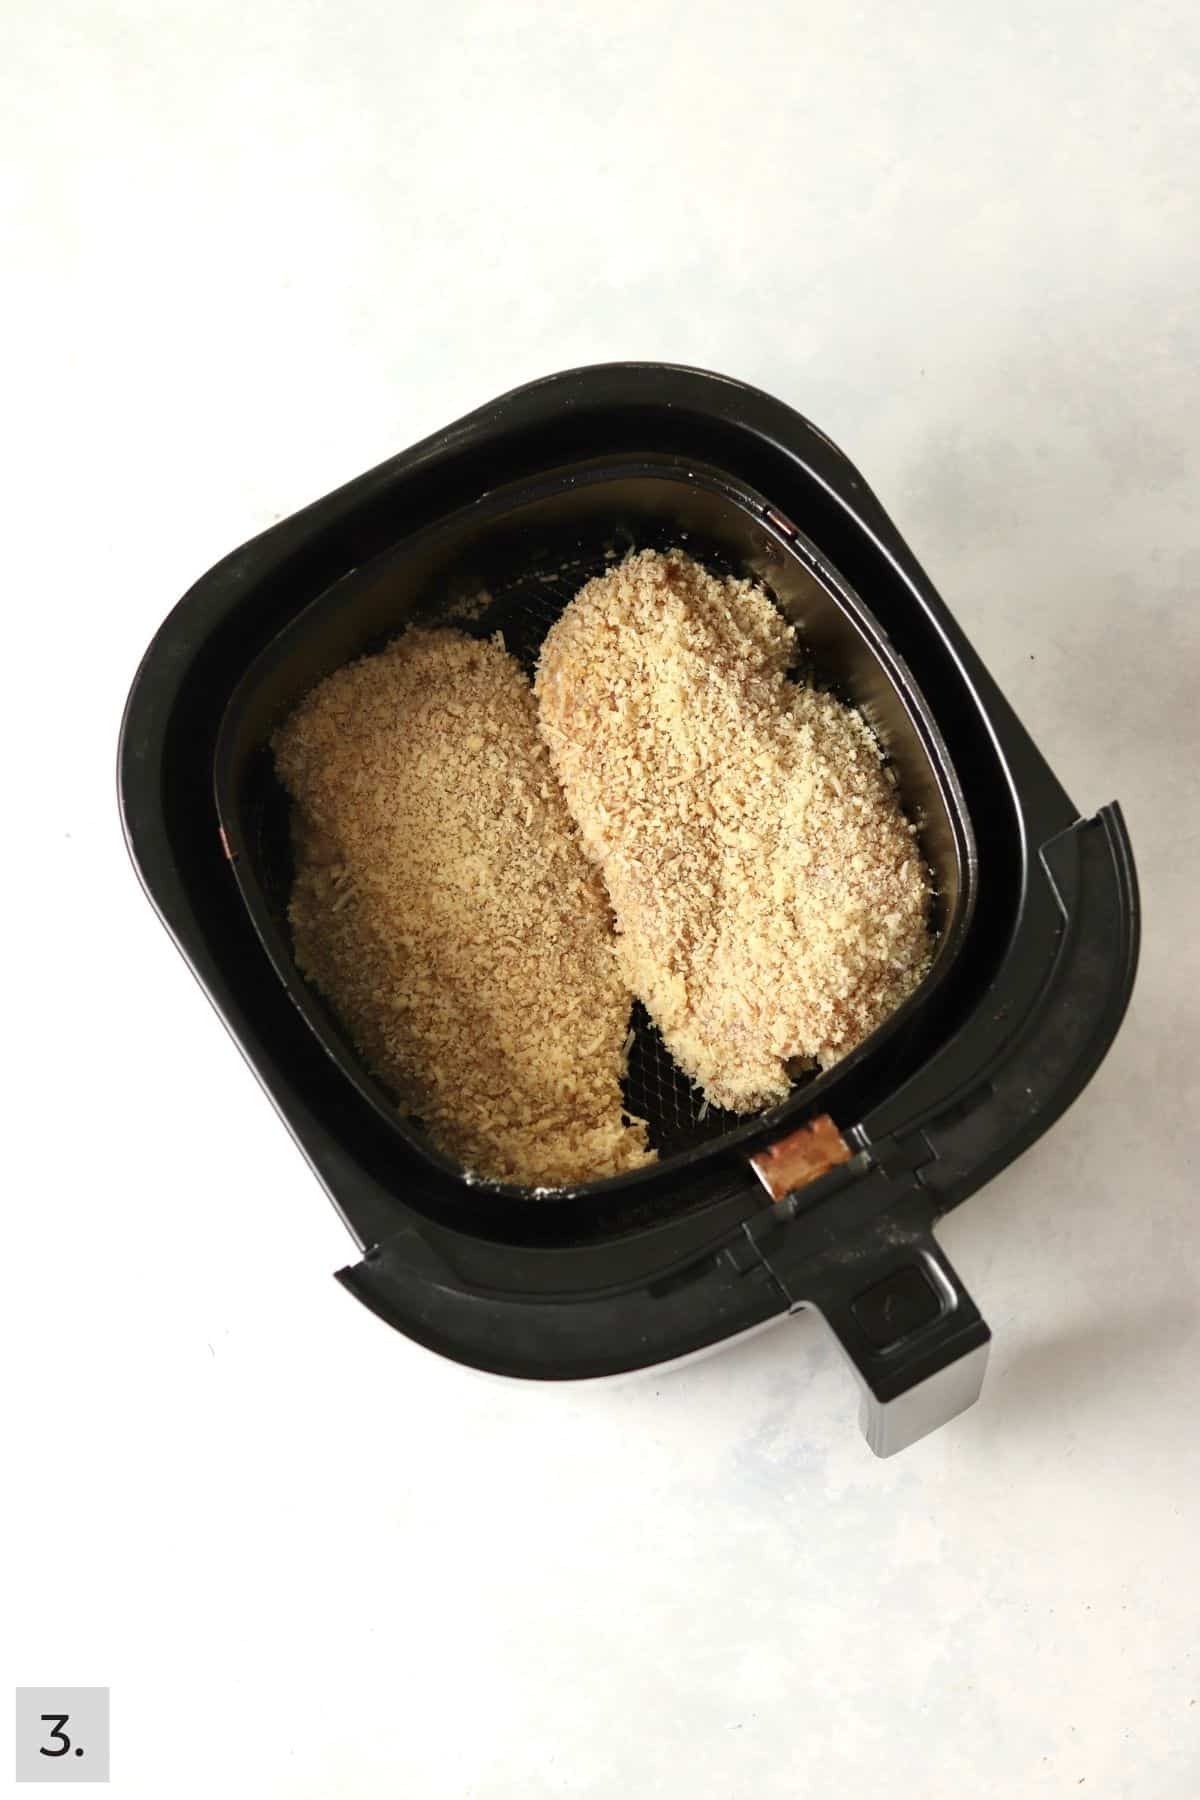 Uncooked parmesan crusted chicken in air fryer basket.